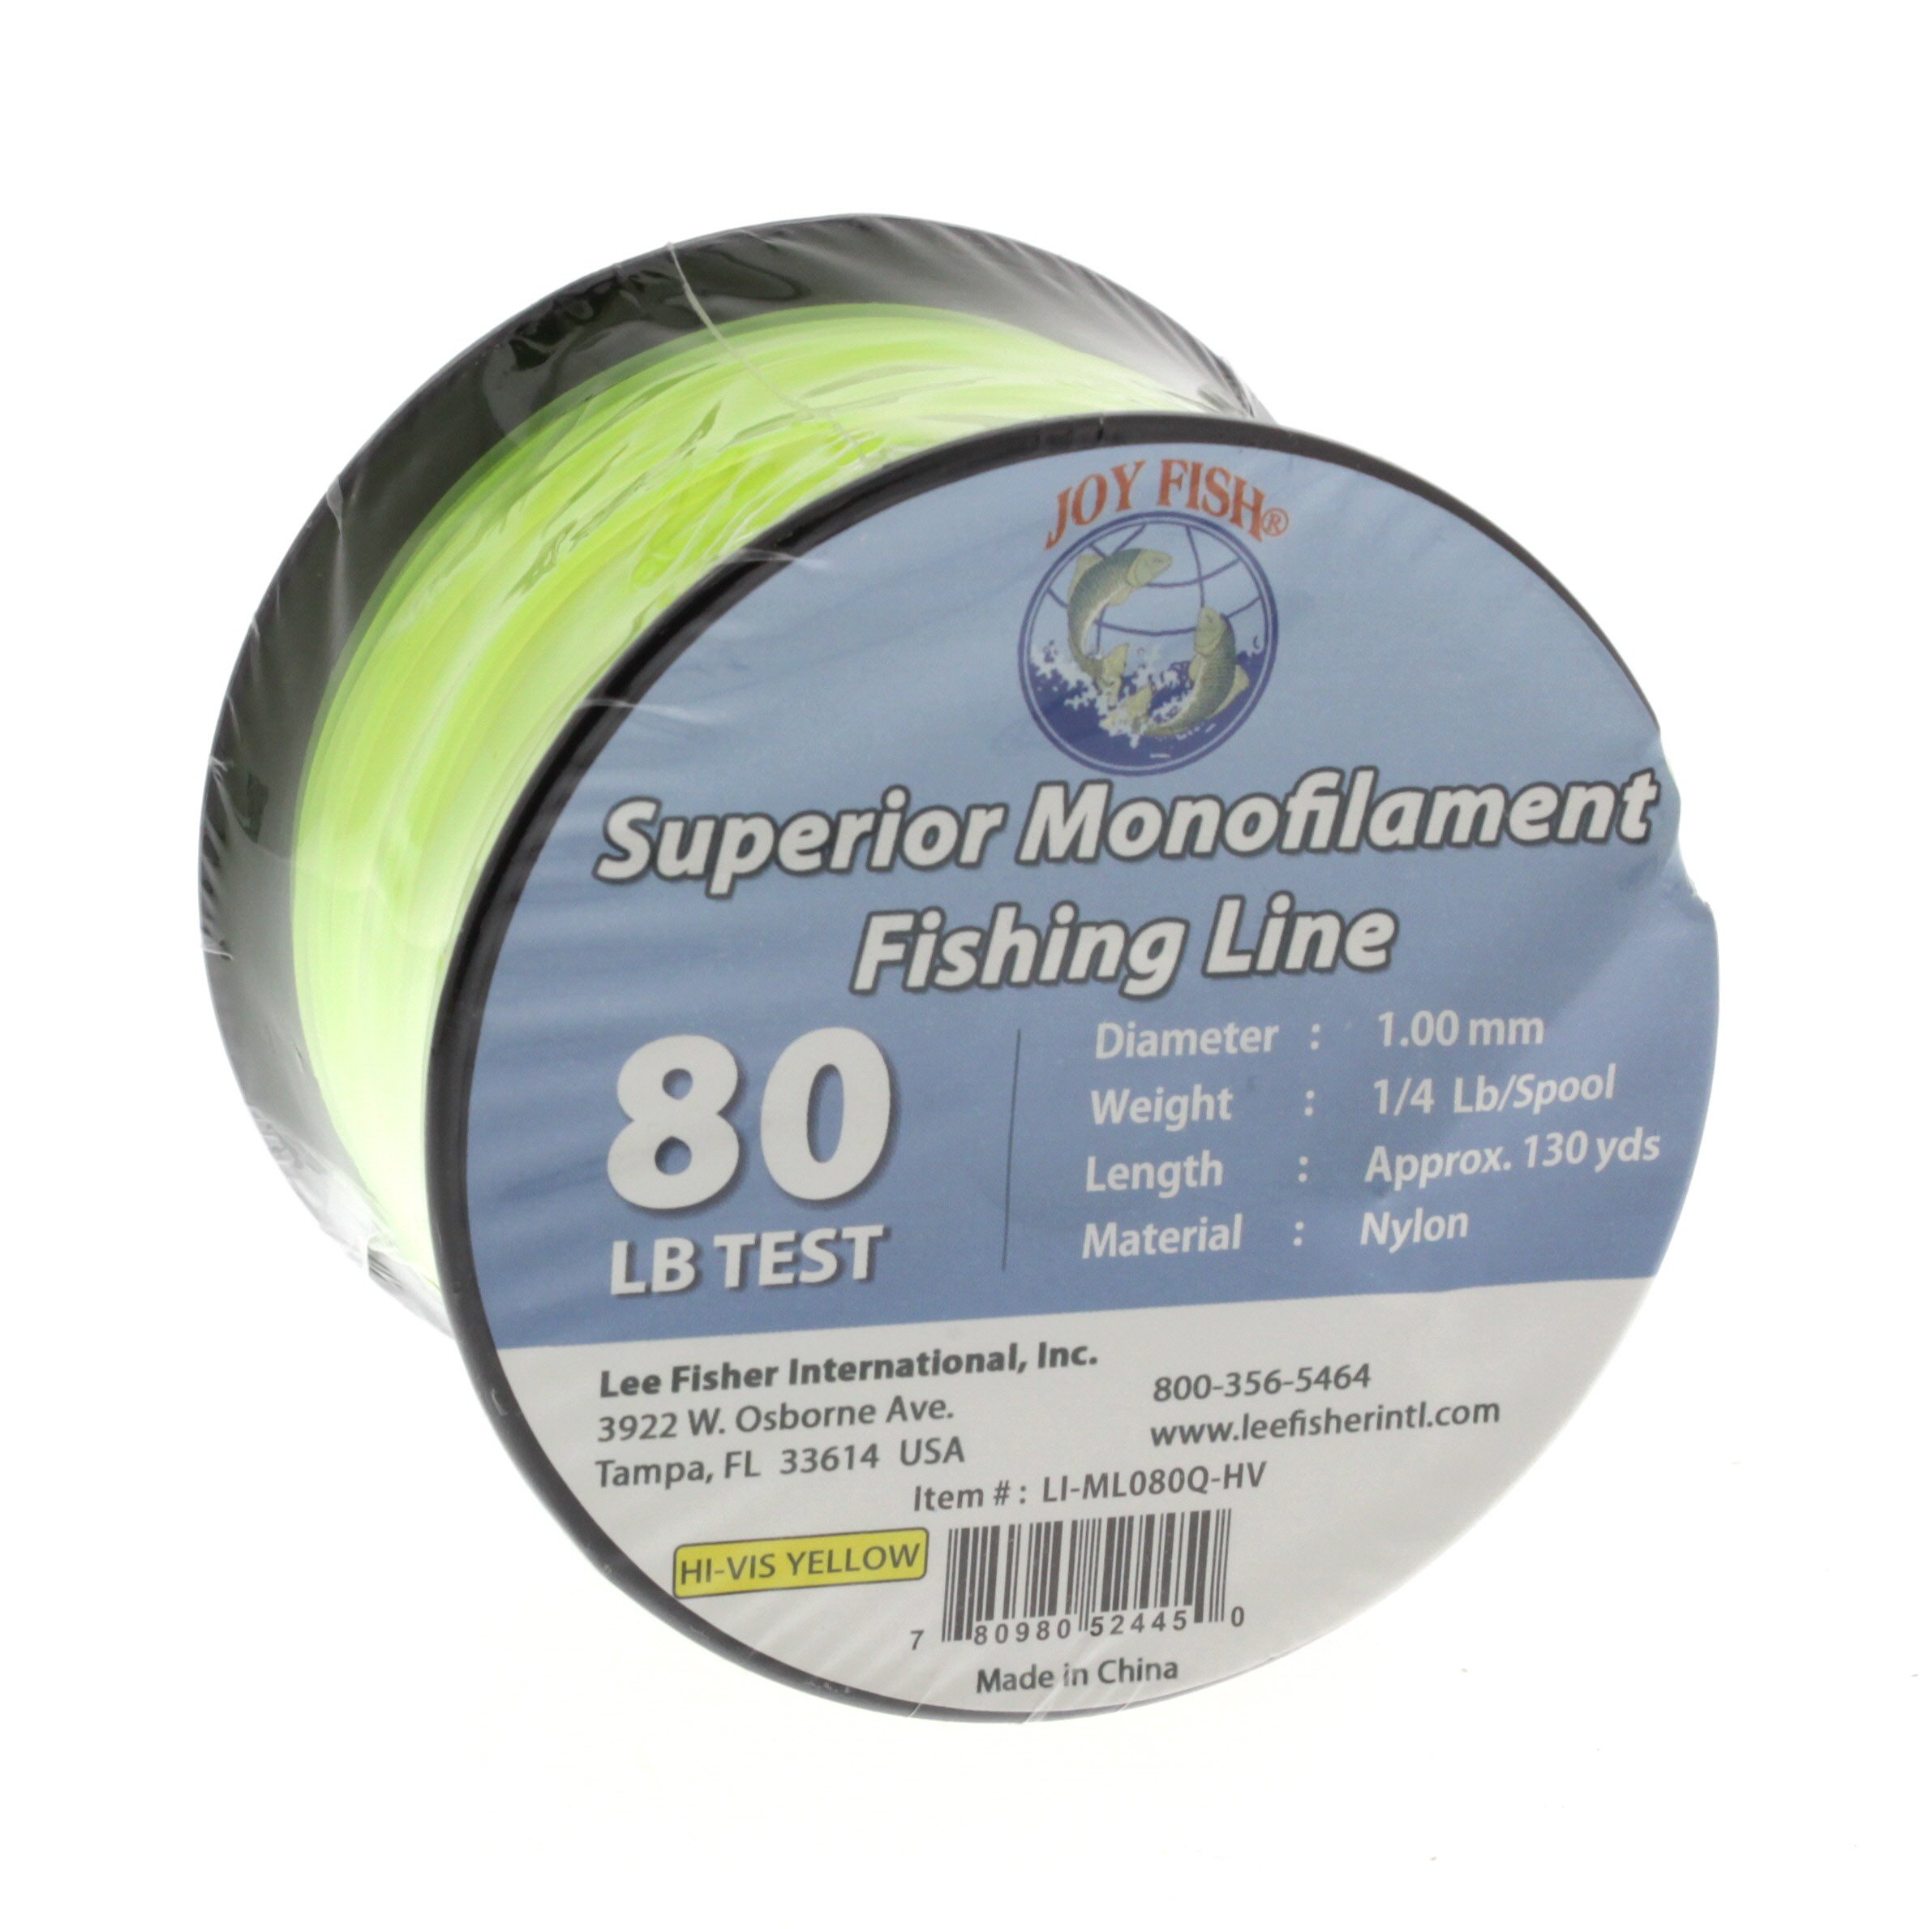 Lee Fisher Superior Monofilament Yellow Fishing Line 80 Lb - Shop